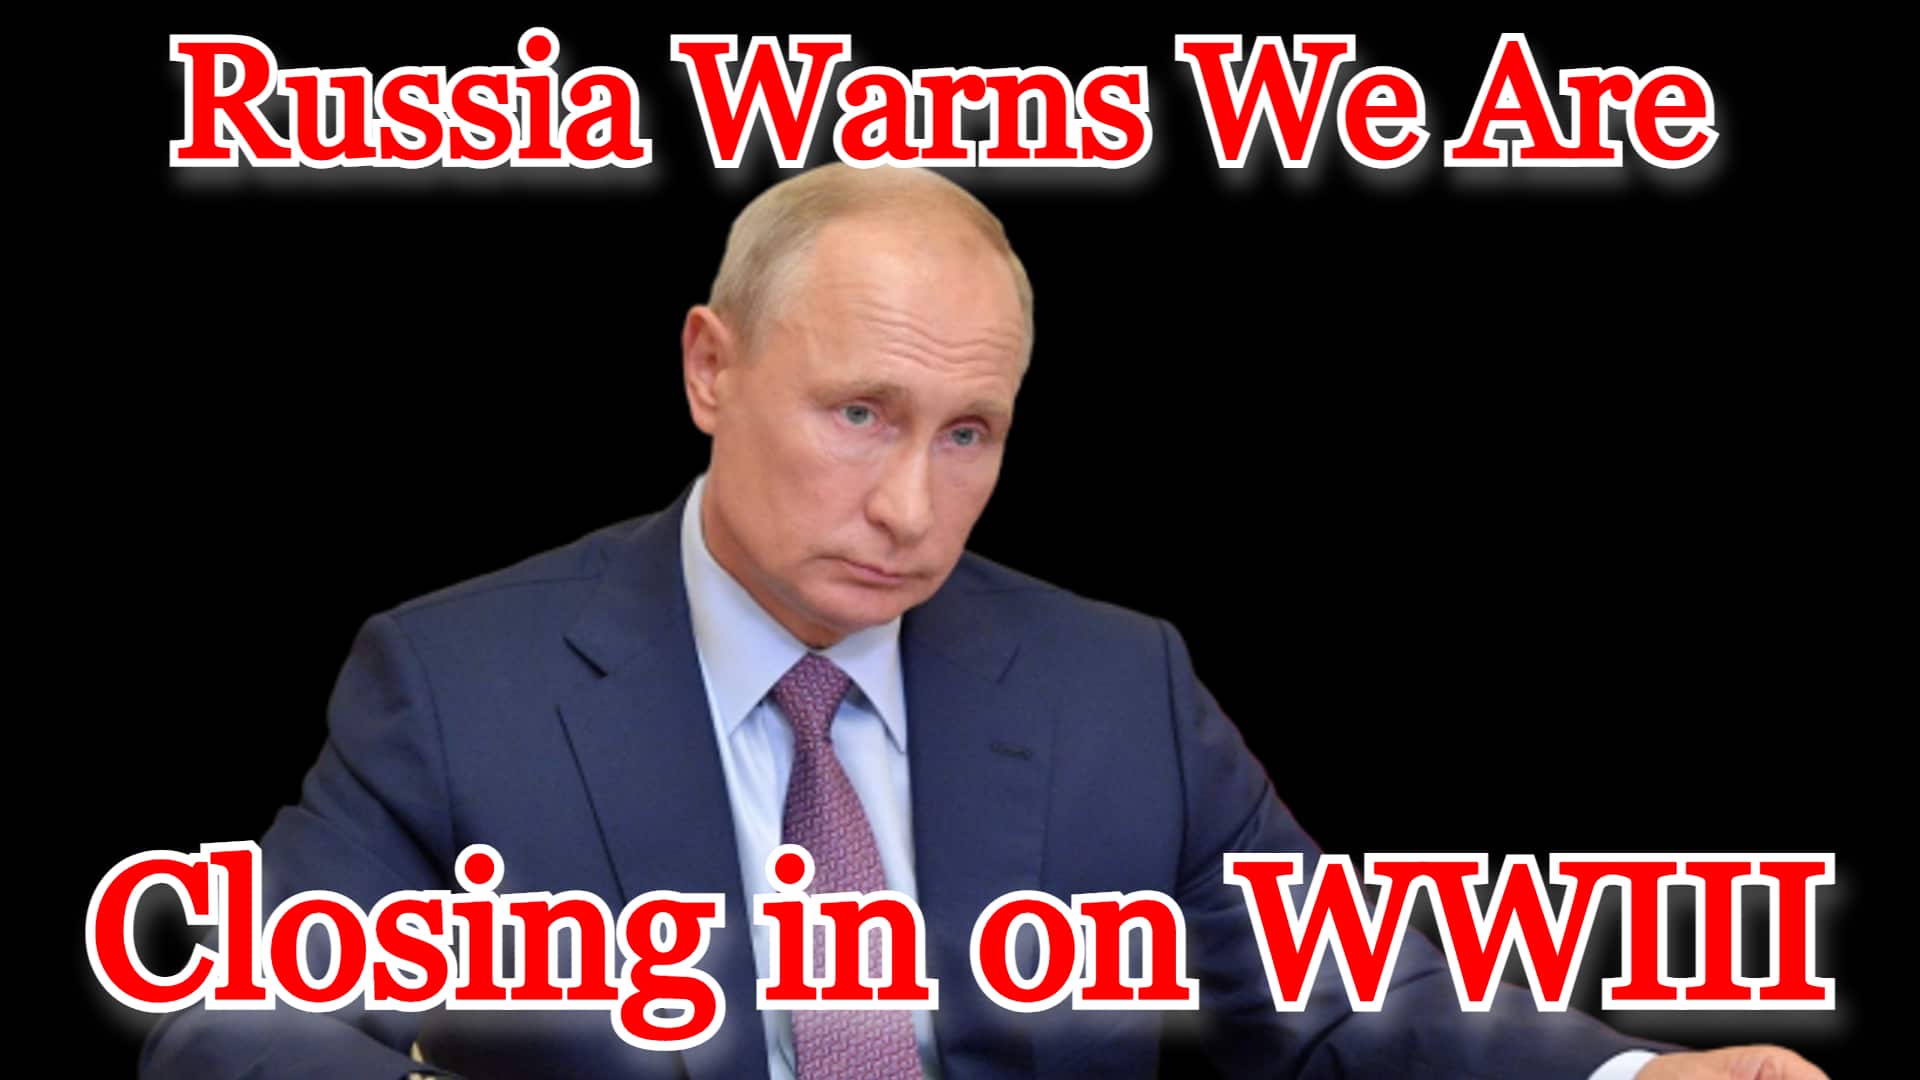 COI #385: Russia Warns We Are Closing in on WWIII